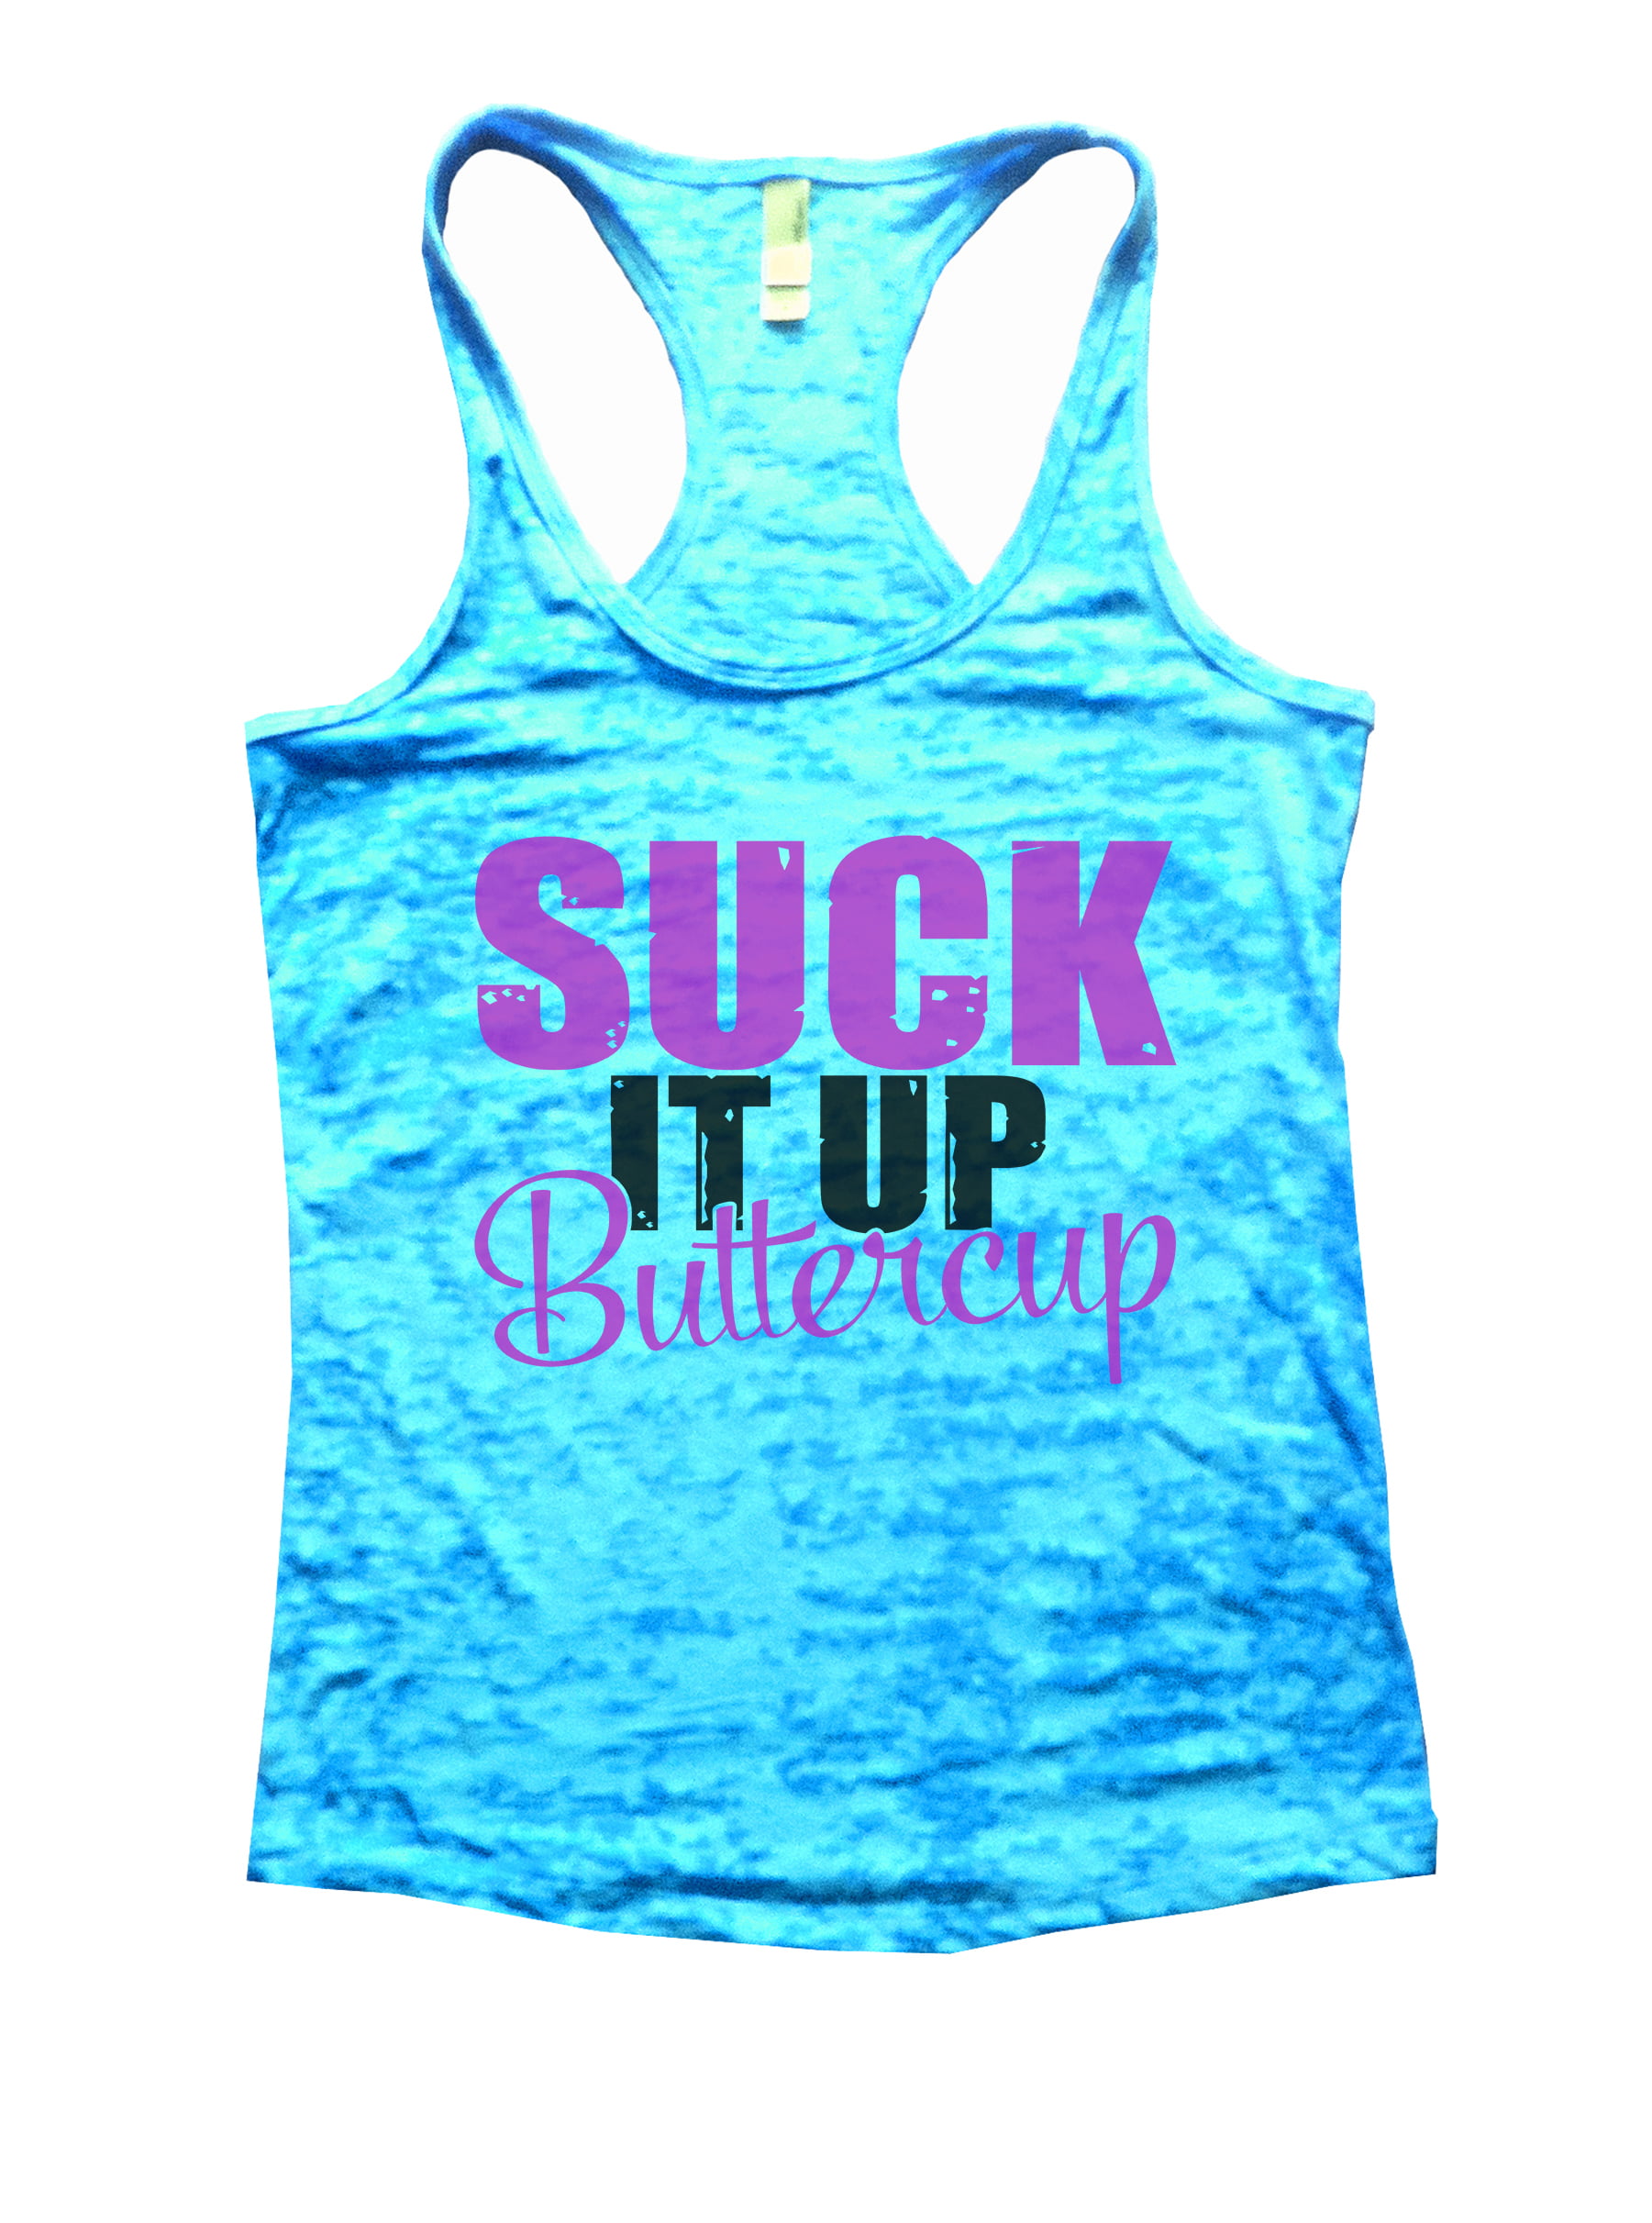 24 Color Options Funny Gym Tank Top 'Suck It Up Buttercup